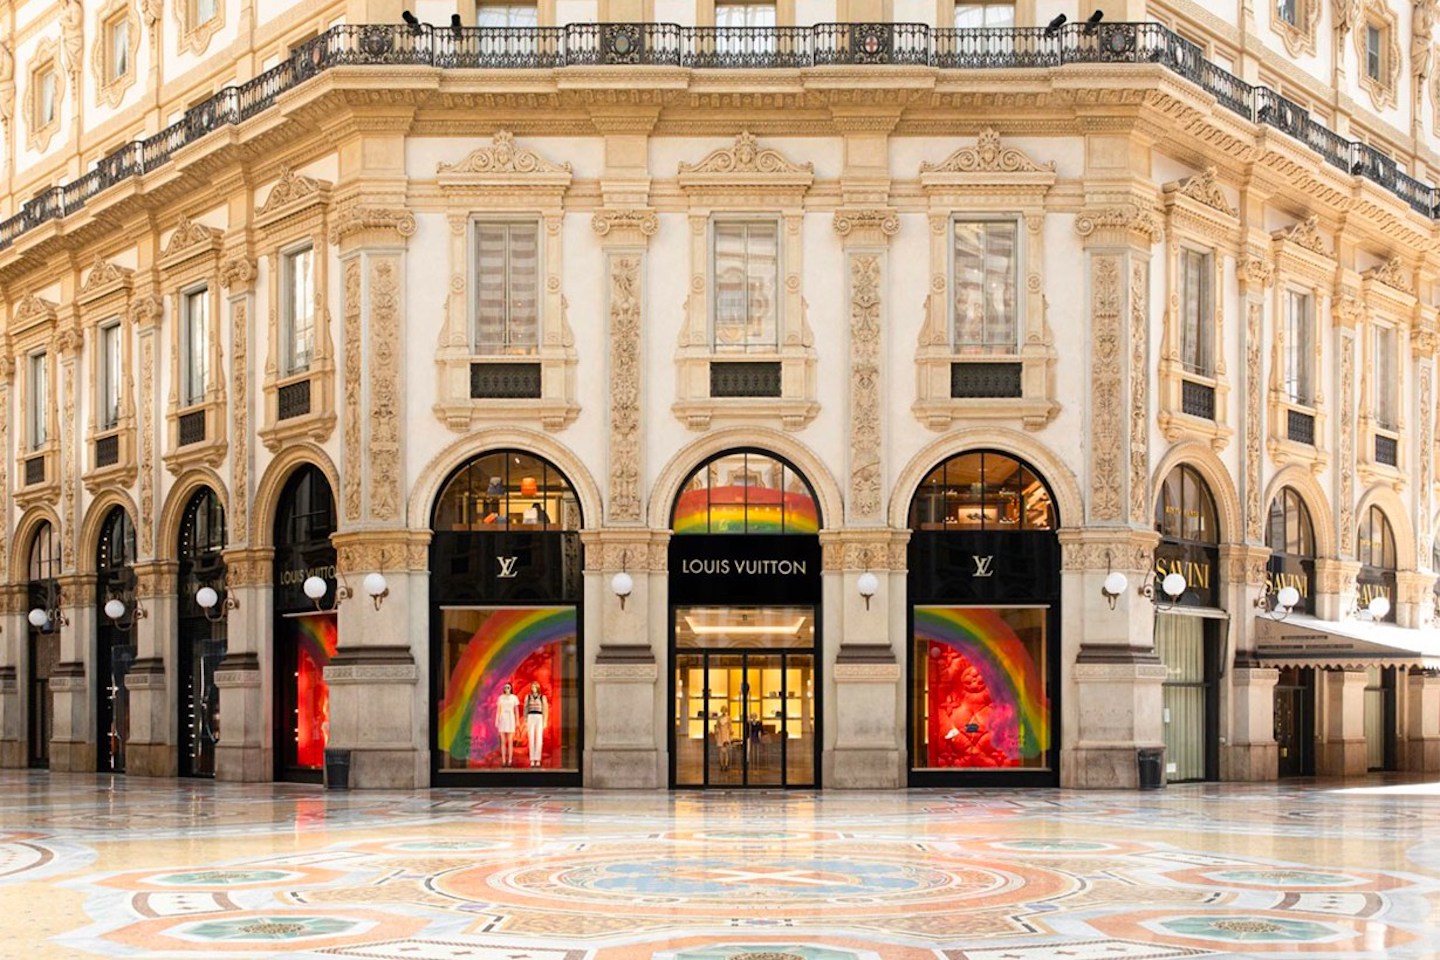 Louis Vuitton Store Displays in the Fashion District of Milan